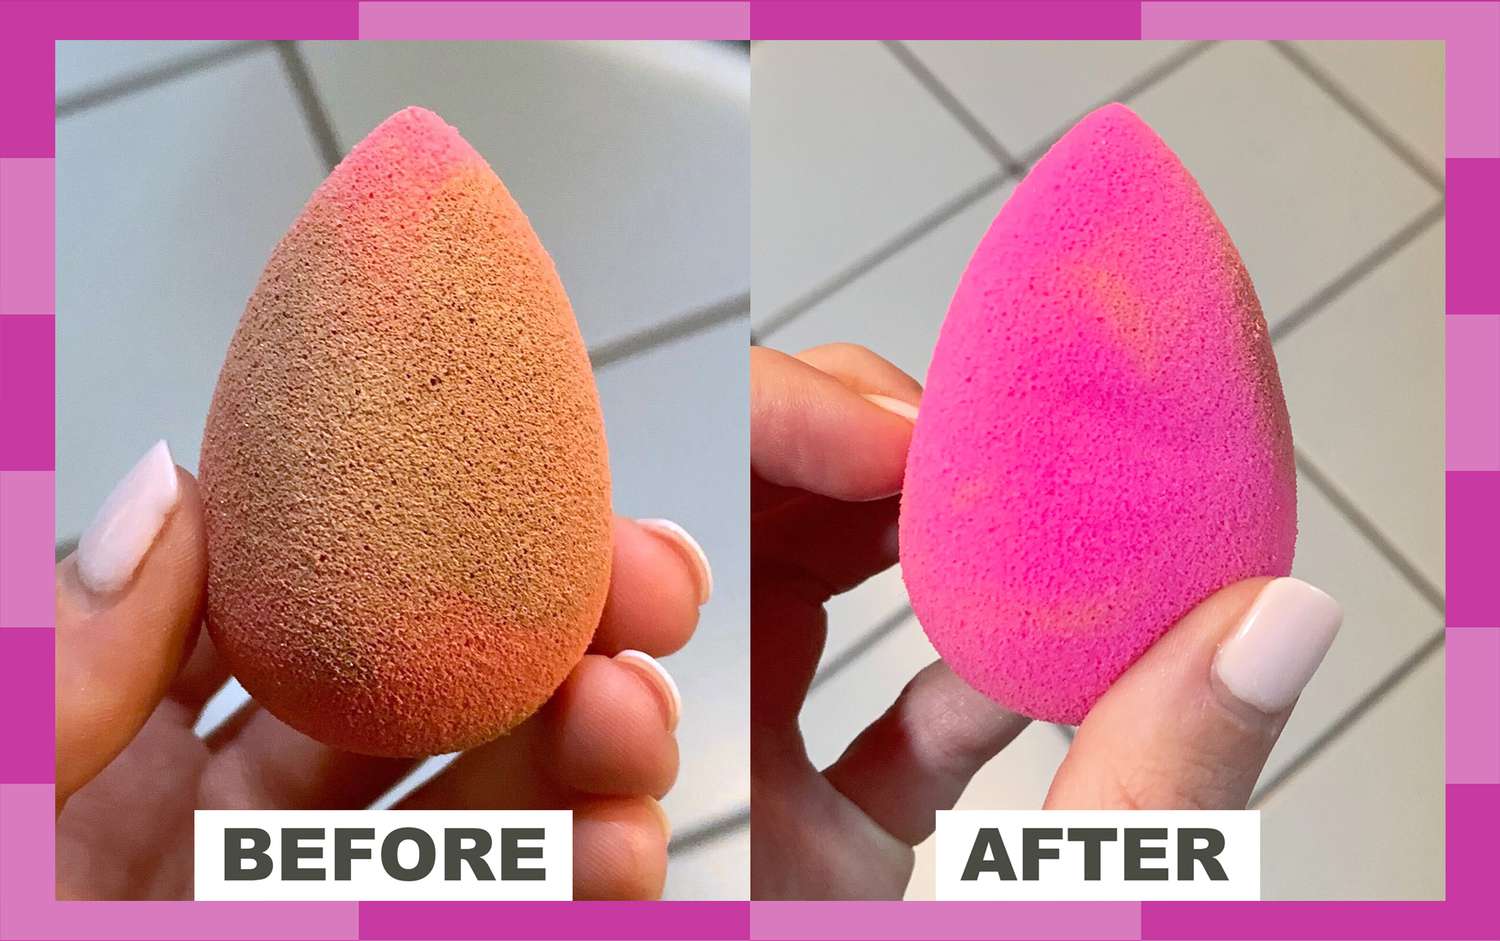 I Tried the Easy Cleaning Hack to Get Your Beautyblender Looking